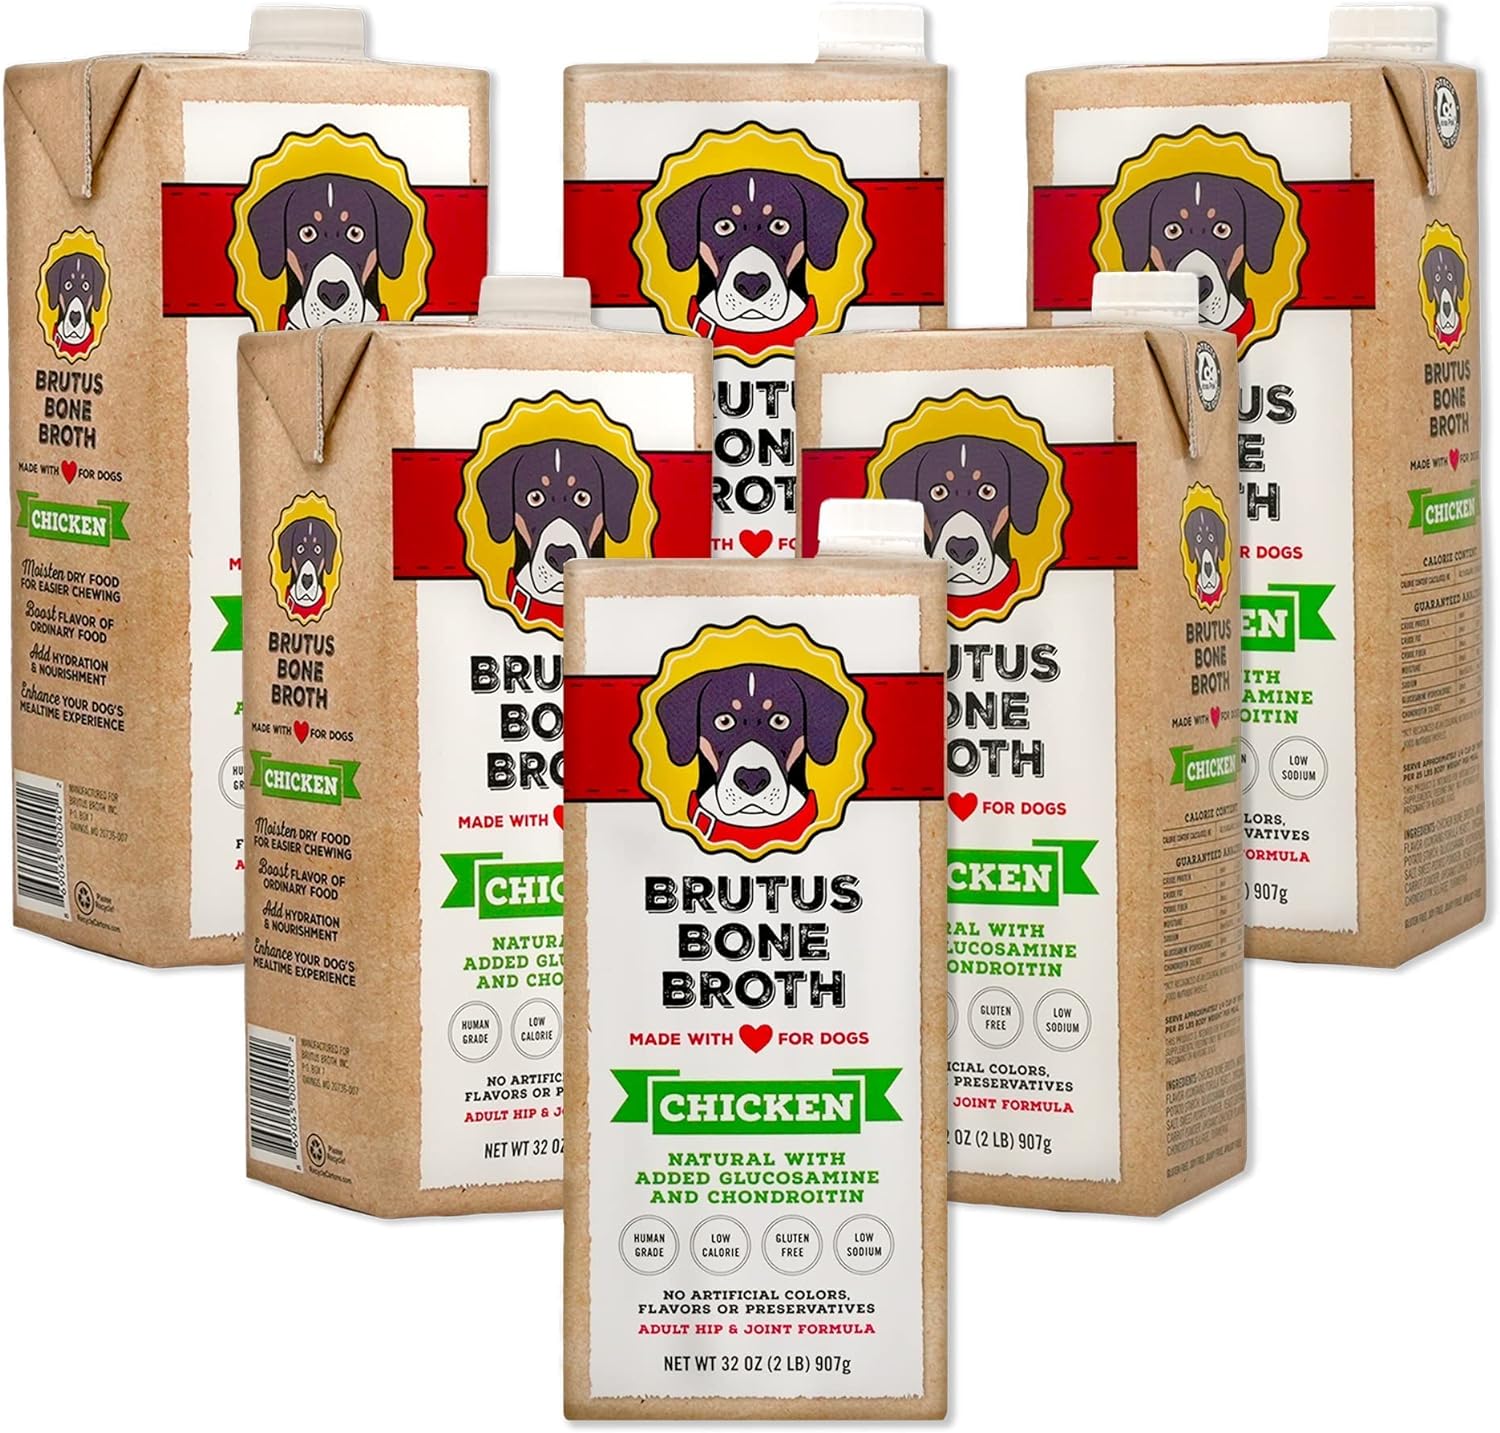 Brutus Chicken Broth for Dogs - All Natural Chicken Bone Broth for Dogs with Chondroitin Glucosamine Turmeric -Human Grade Dog Food Toppers for Picky Eaters & Dry Food -Tasty & Nutritious- Pack of 6